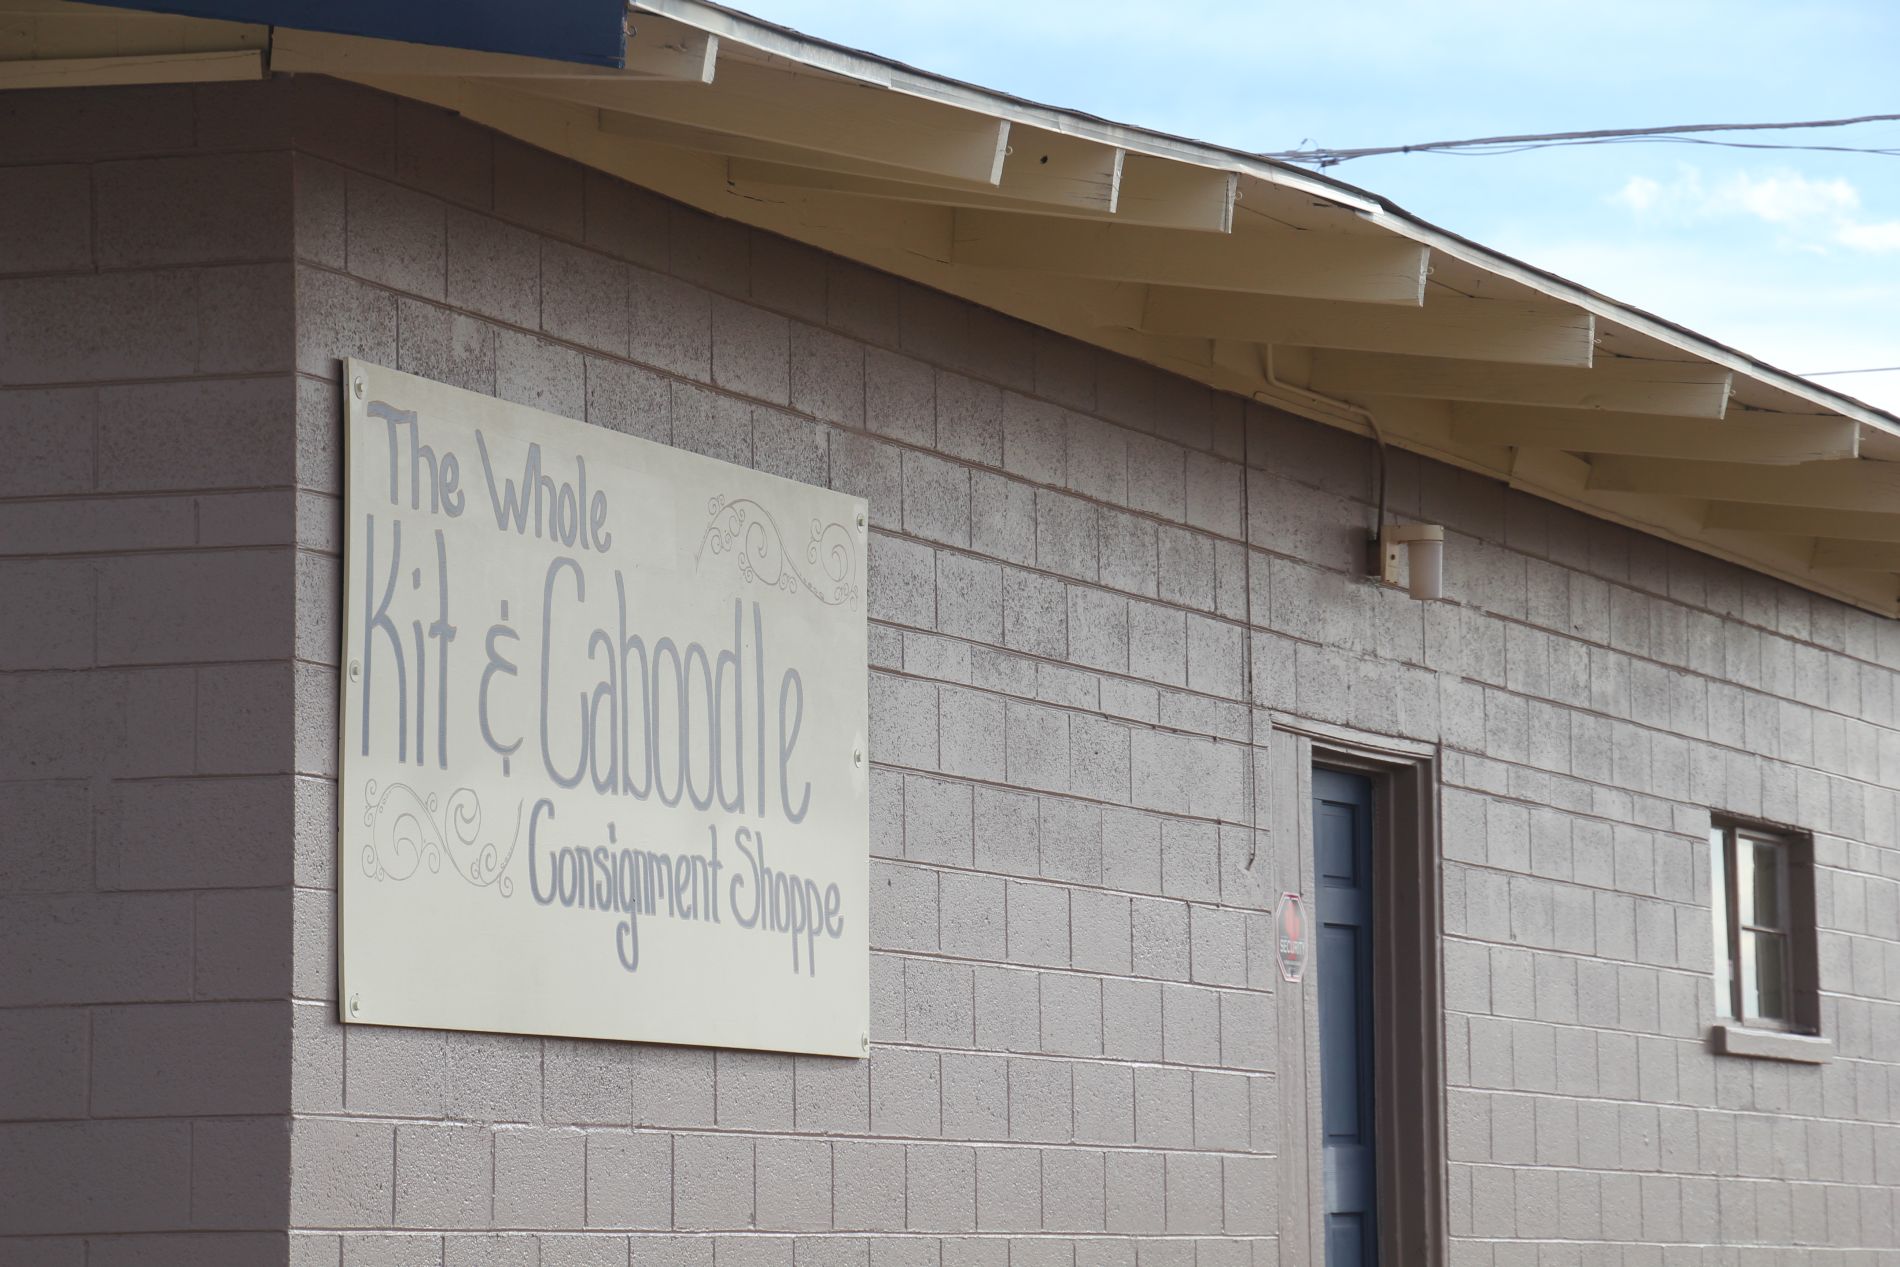 The Whole Kit & Caboodle Consignment Shoppe in Winslow, Arizona